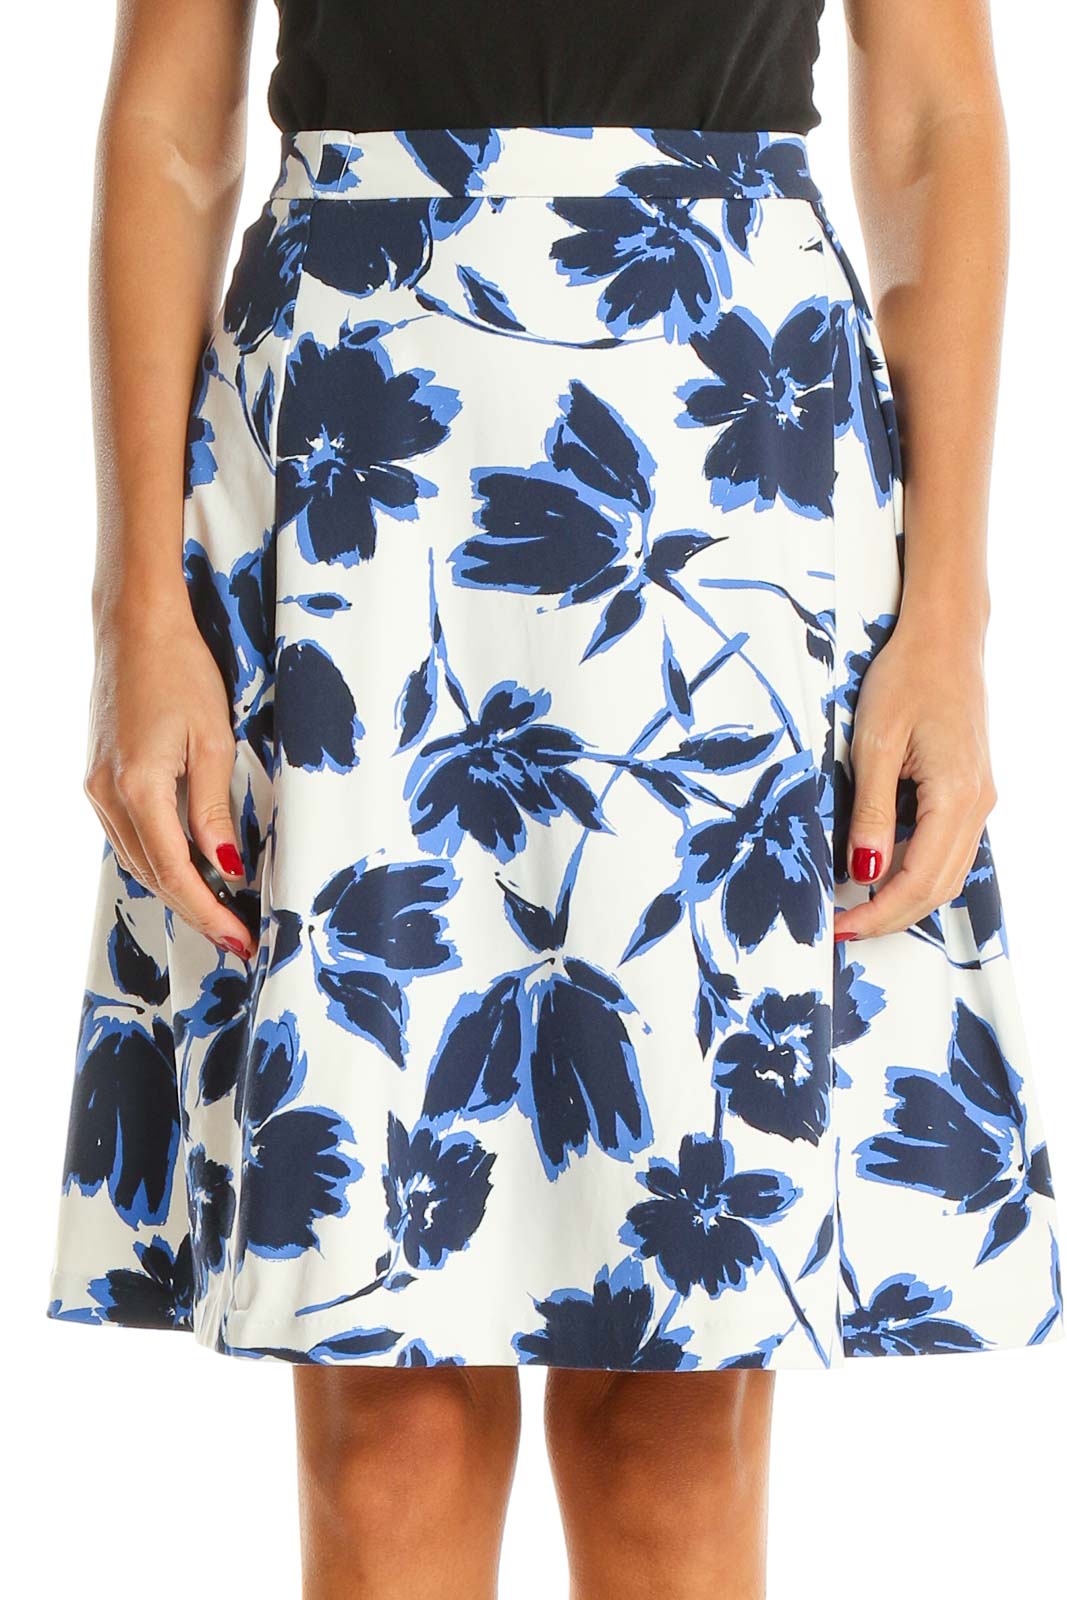 White Blue Floral Print Chic A-Line Skirt Front